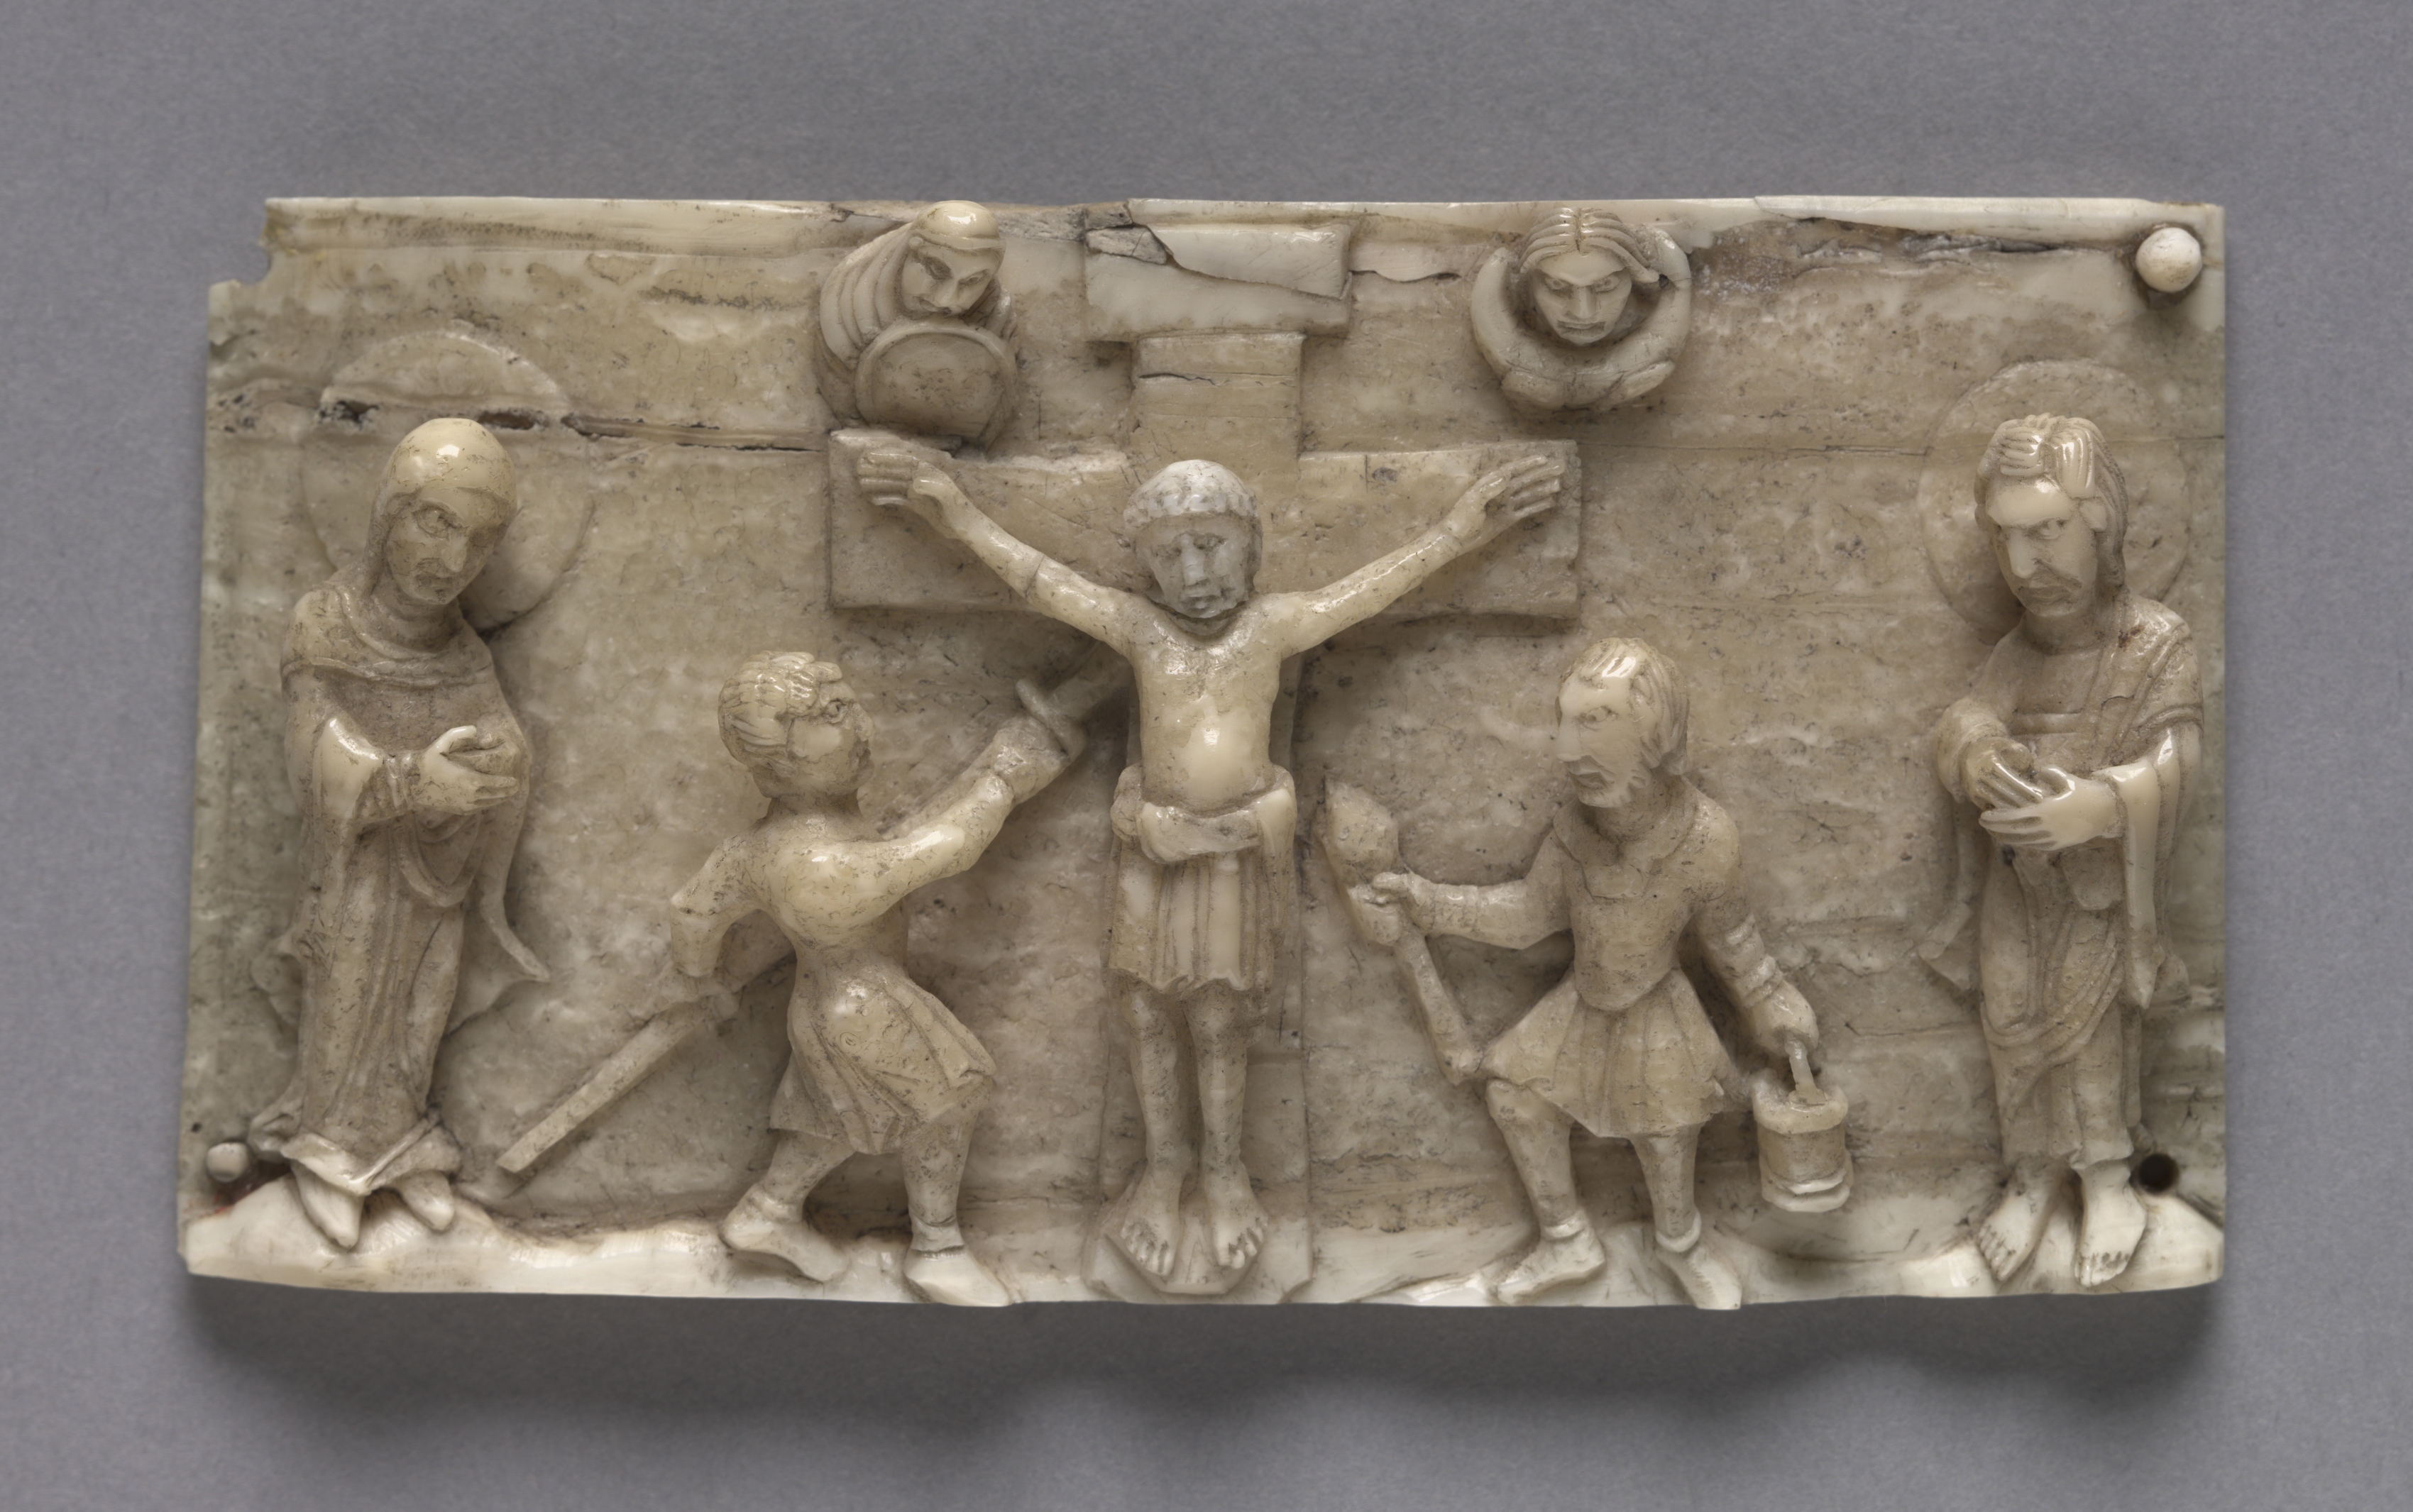 Plaque from a Portable Altar Showing the Crucifixion